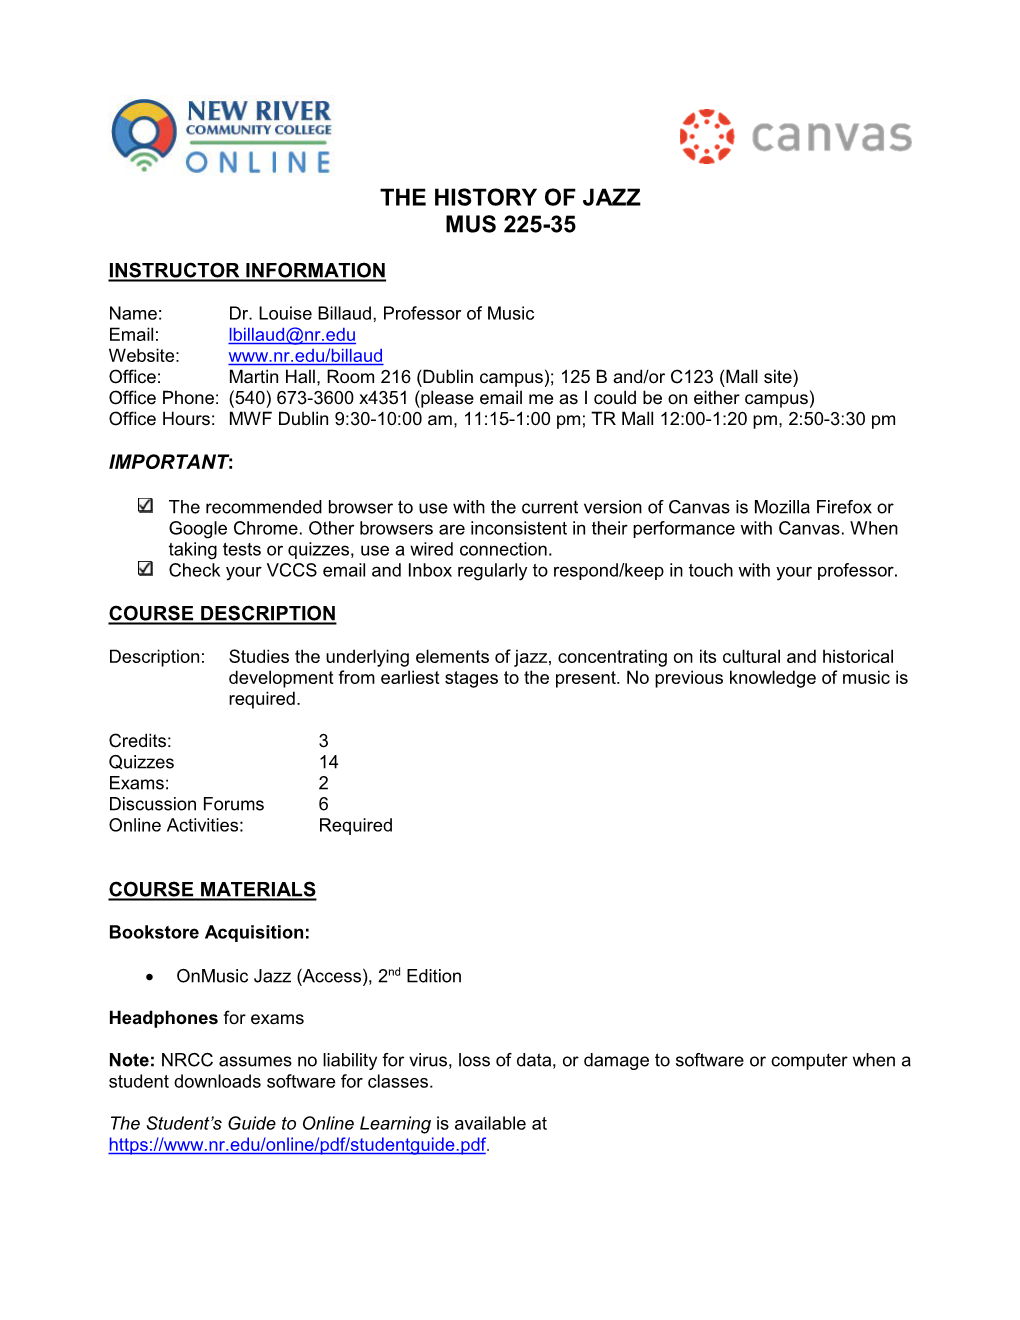 The History of Jazz Mus 225-35